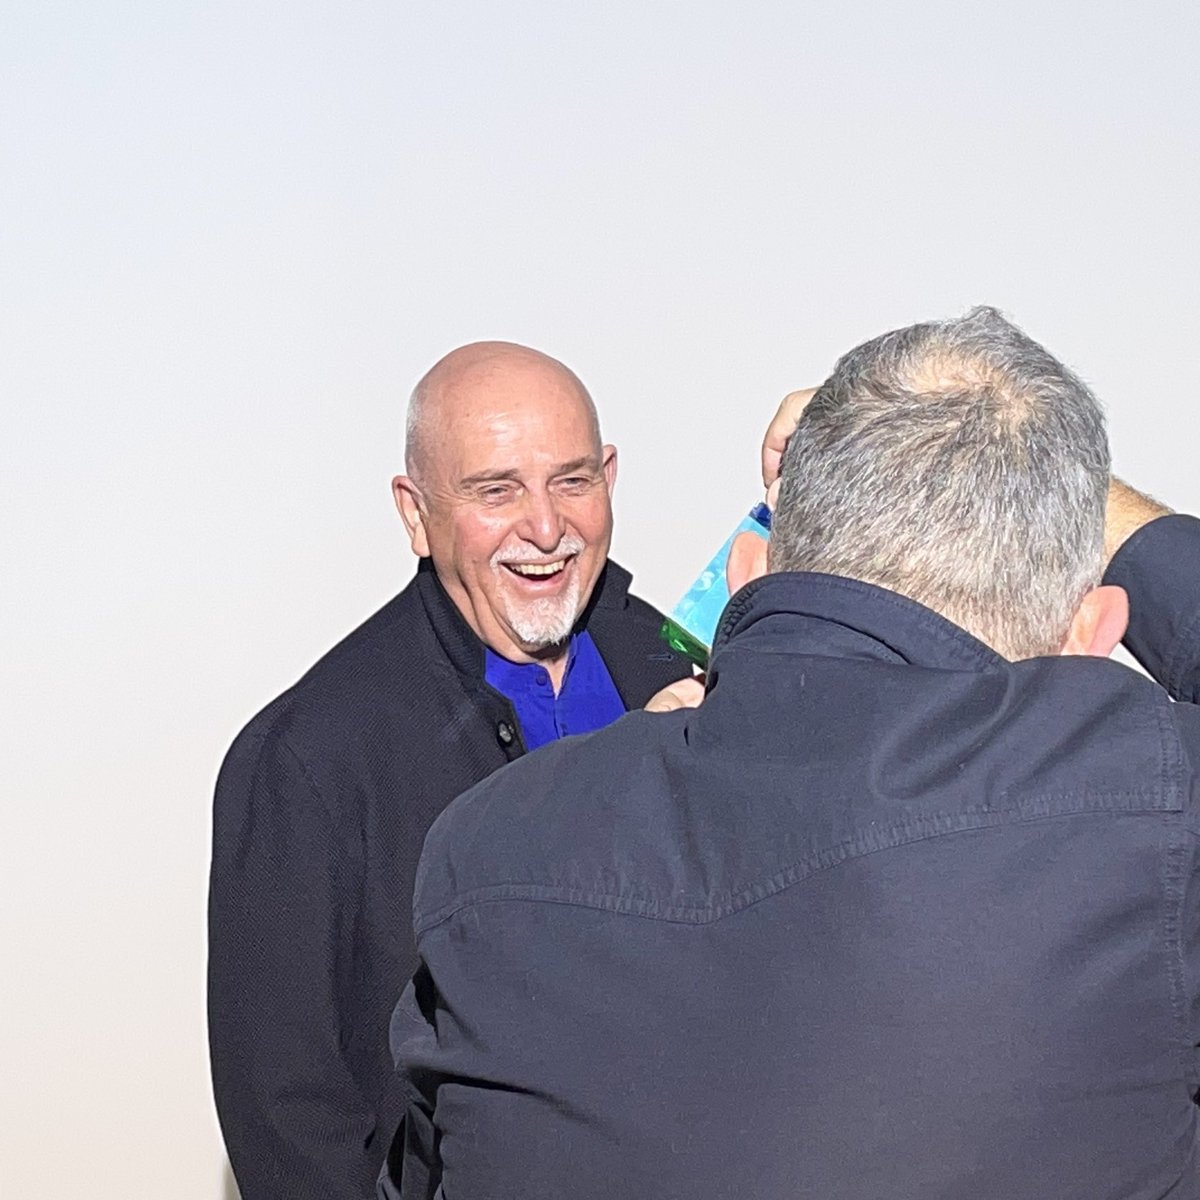 In mid-December 2022, Peter and Nadav Kander met for a new photo session to support the release of i/o. It was their first session together since 2006. Go behind the scenes of a memorable day >> petergabriel.com/focus/meeting-…